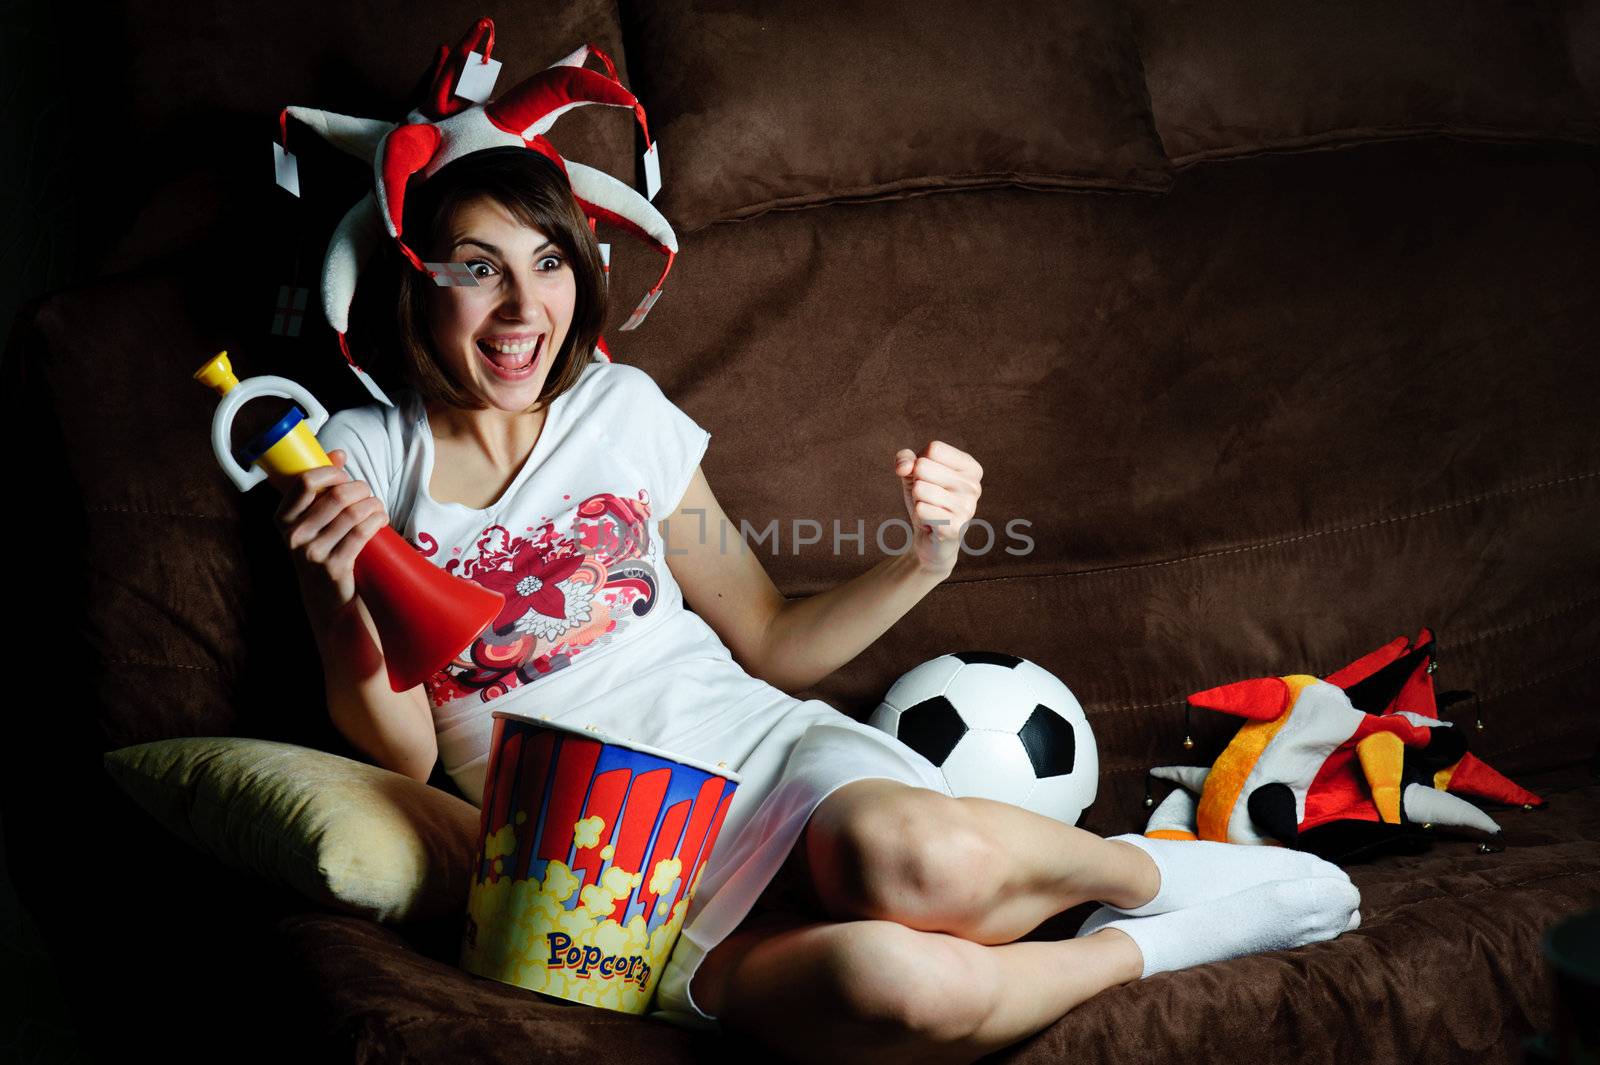 An image of a girl on a sofa watching football on TV